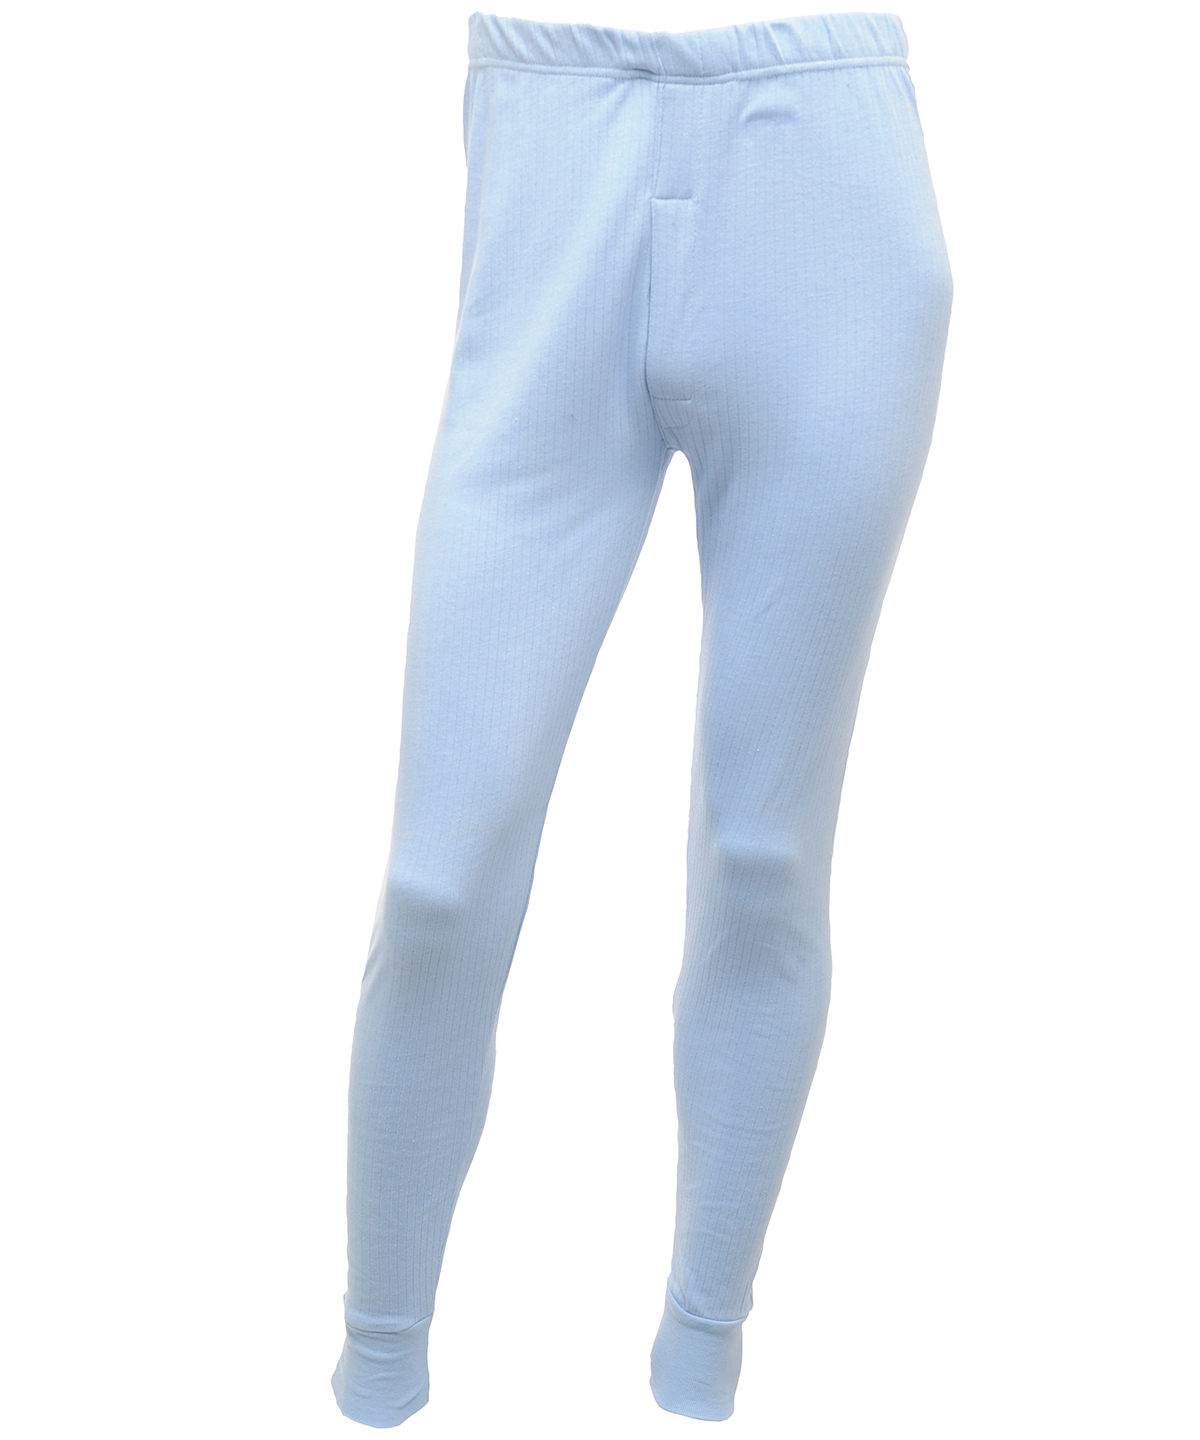 Thermal Long Johns Blue Size 2XLarge